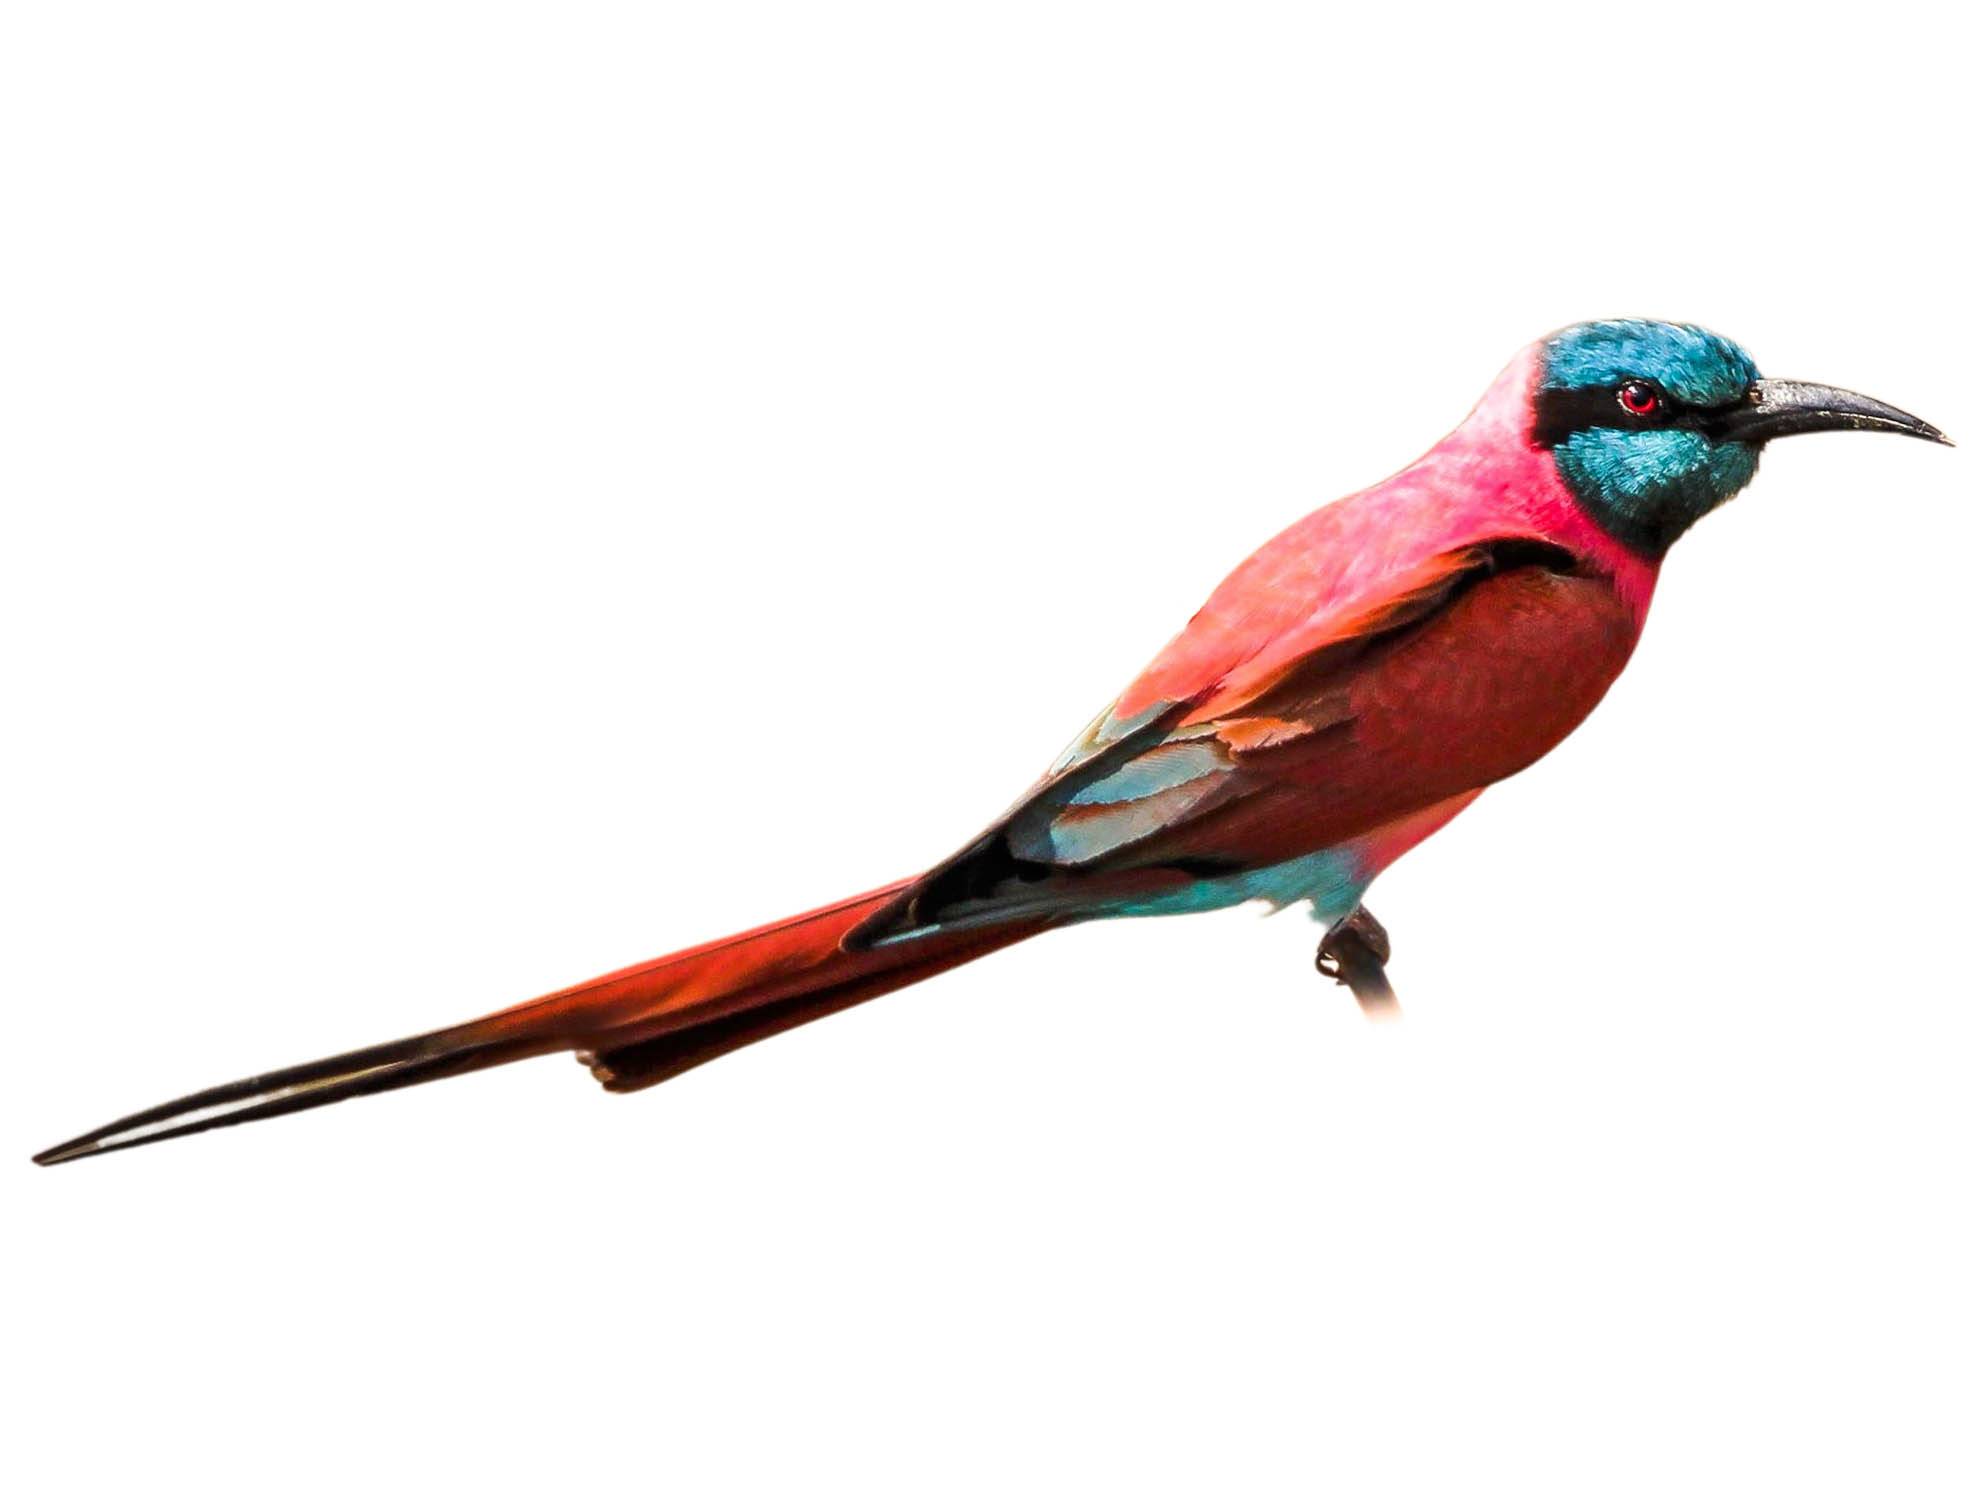 A photo of a Northern Carmine Bee-eater (Merops nubicus)